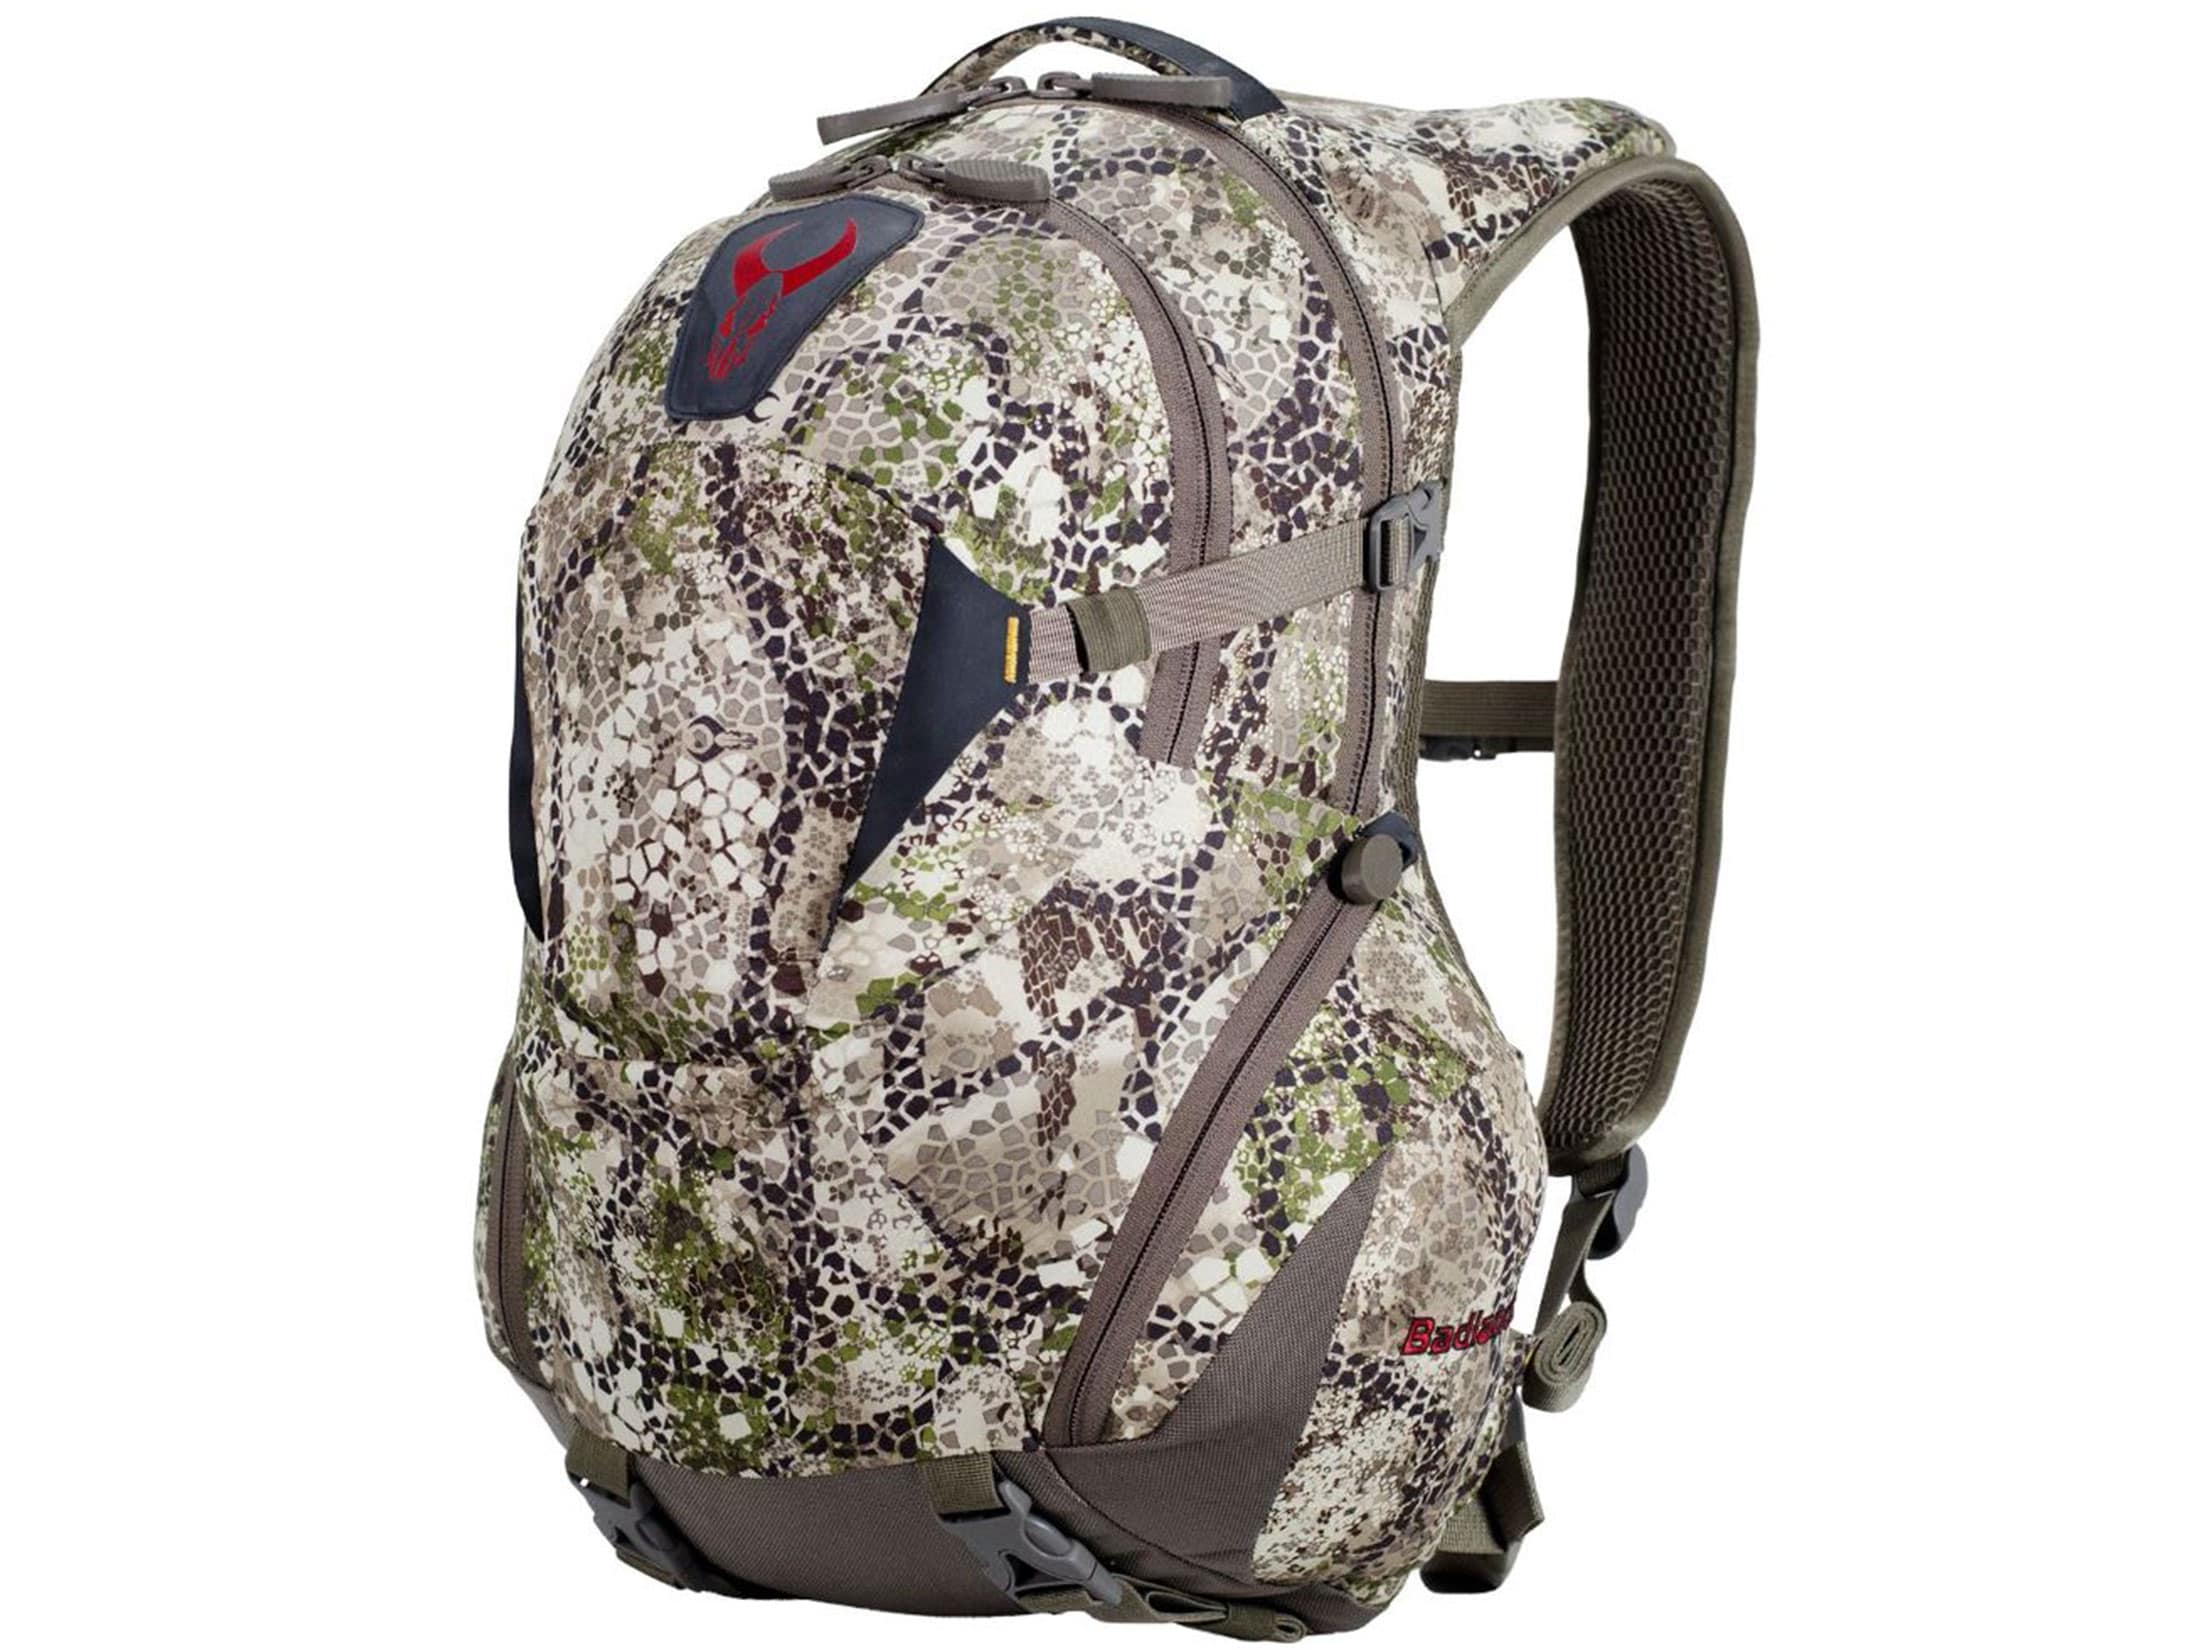 Approach Camo BackPack Back Pack HDX NEW 2018 Badlands Classic Pack 